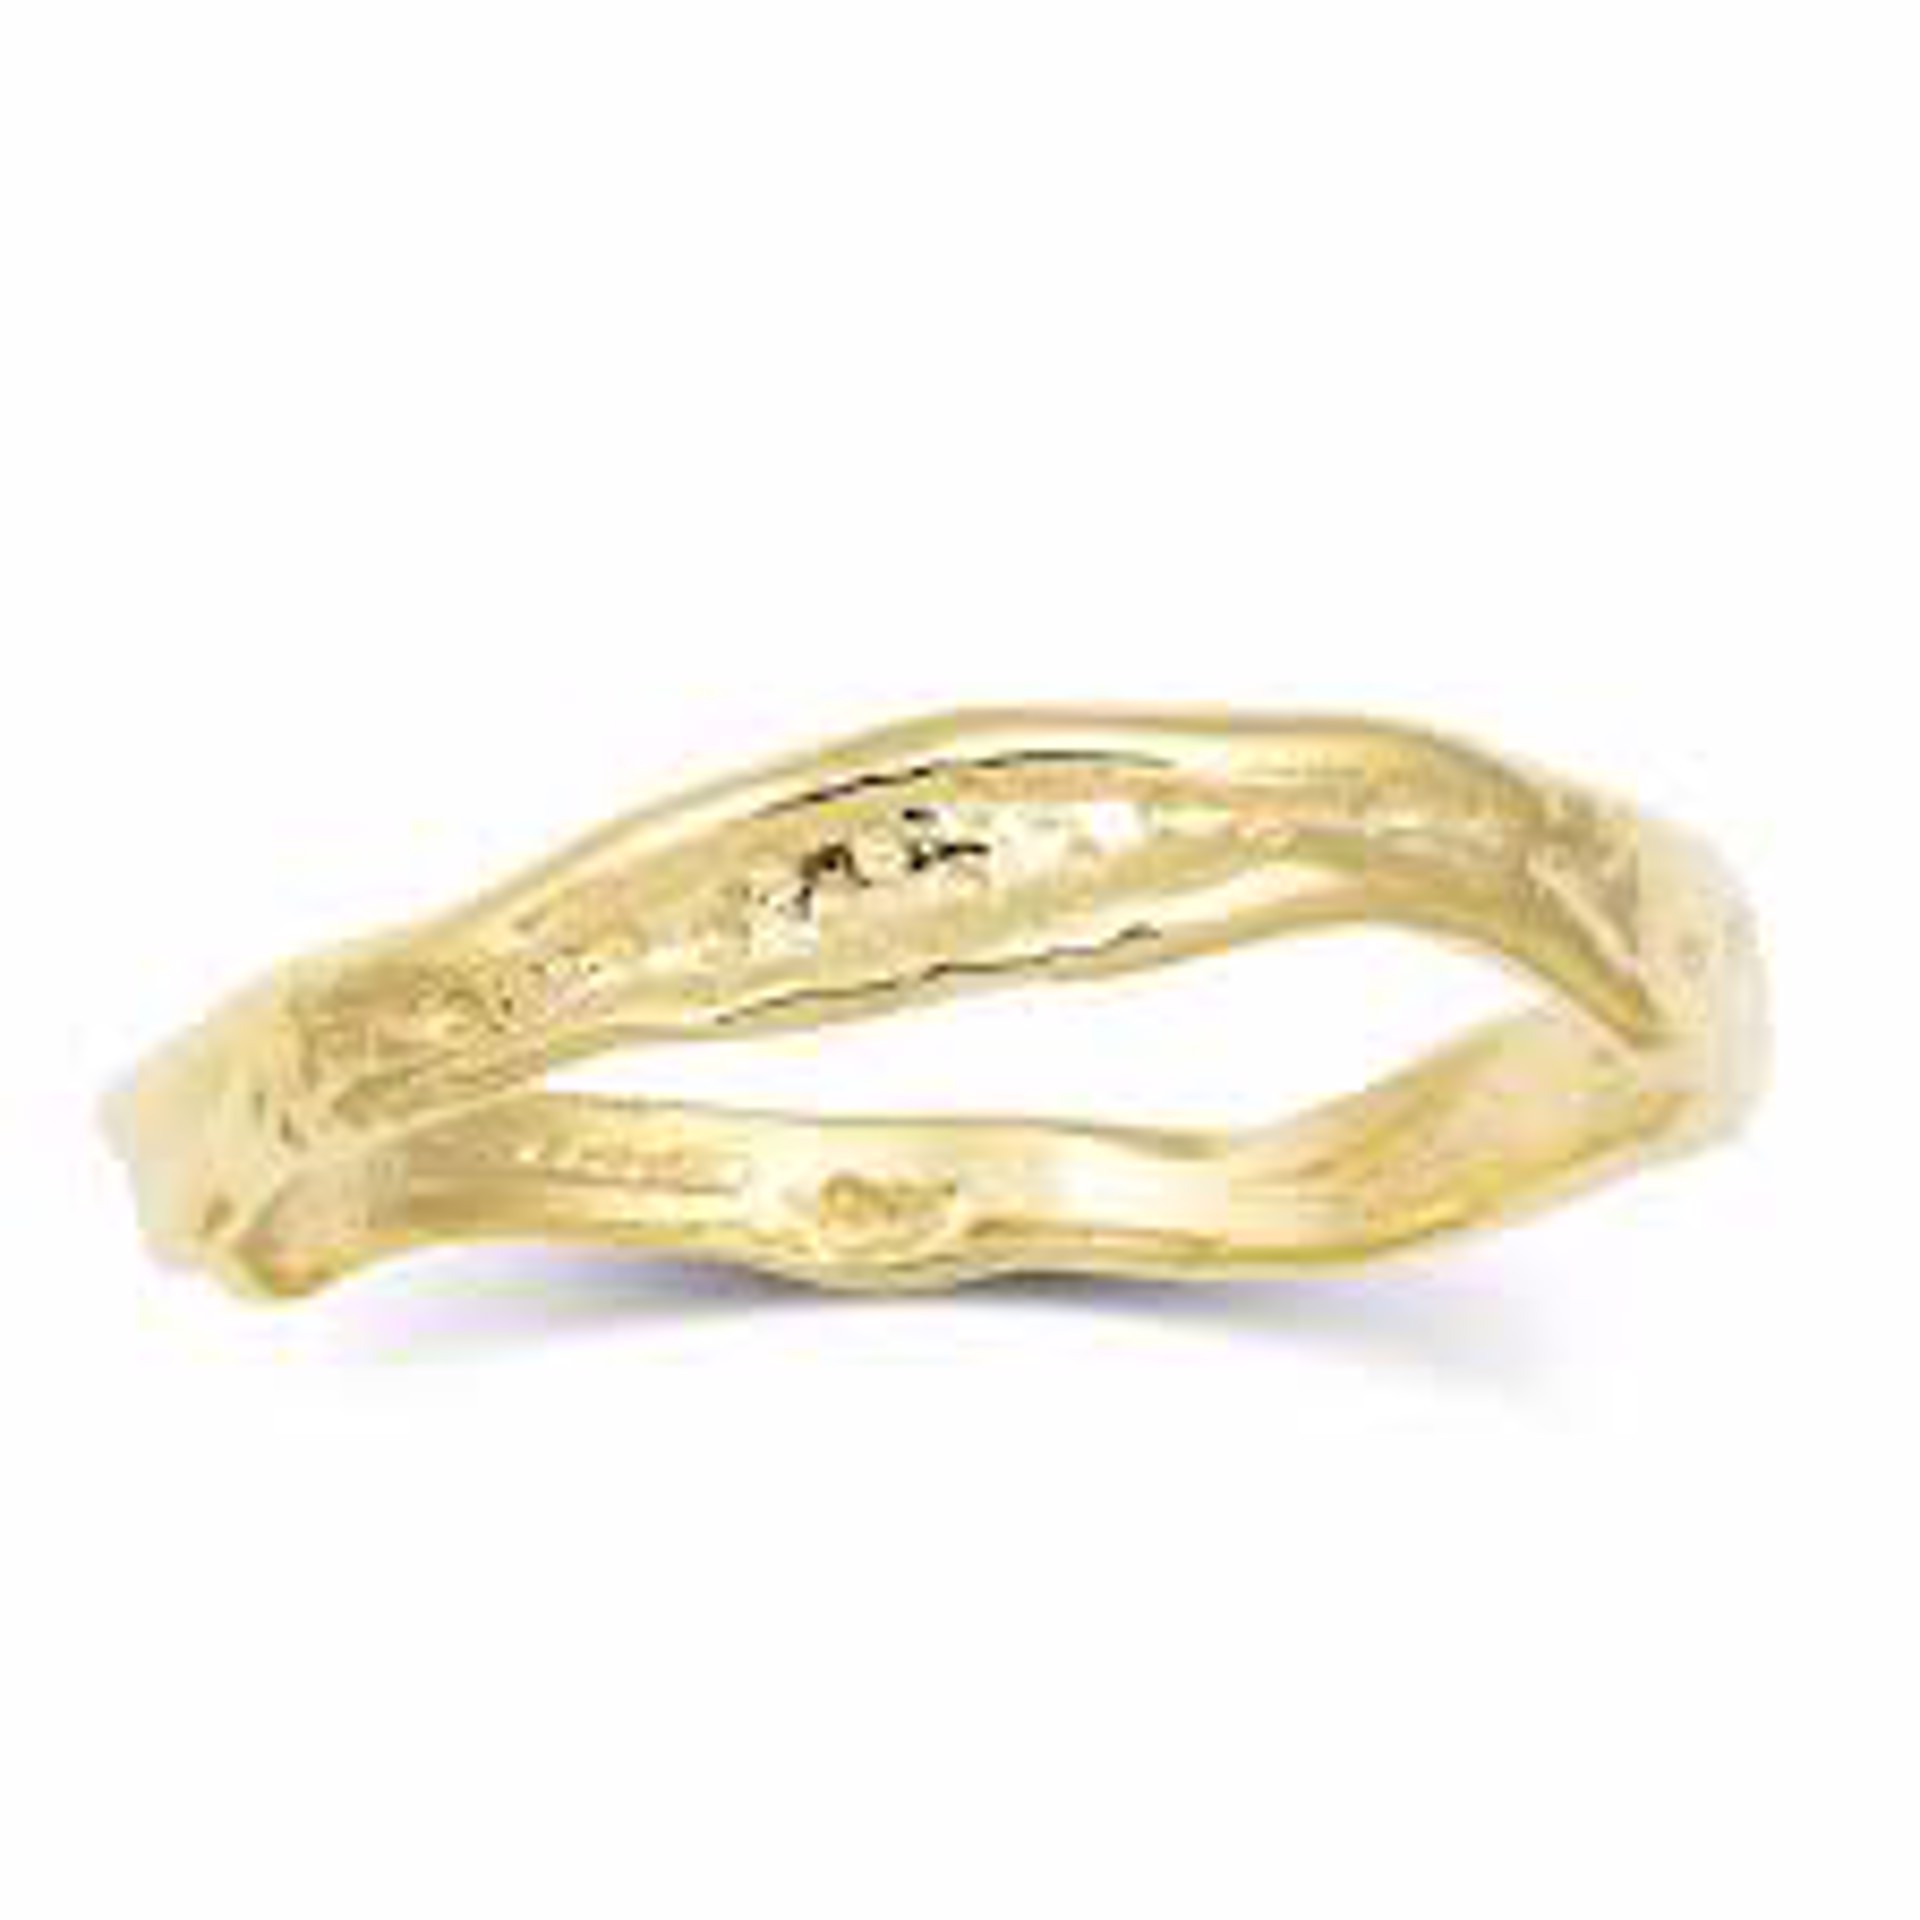 Rhythm of the Sea band- 18k yellow gold by Kristen Baird